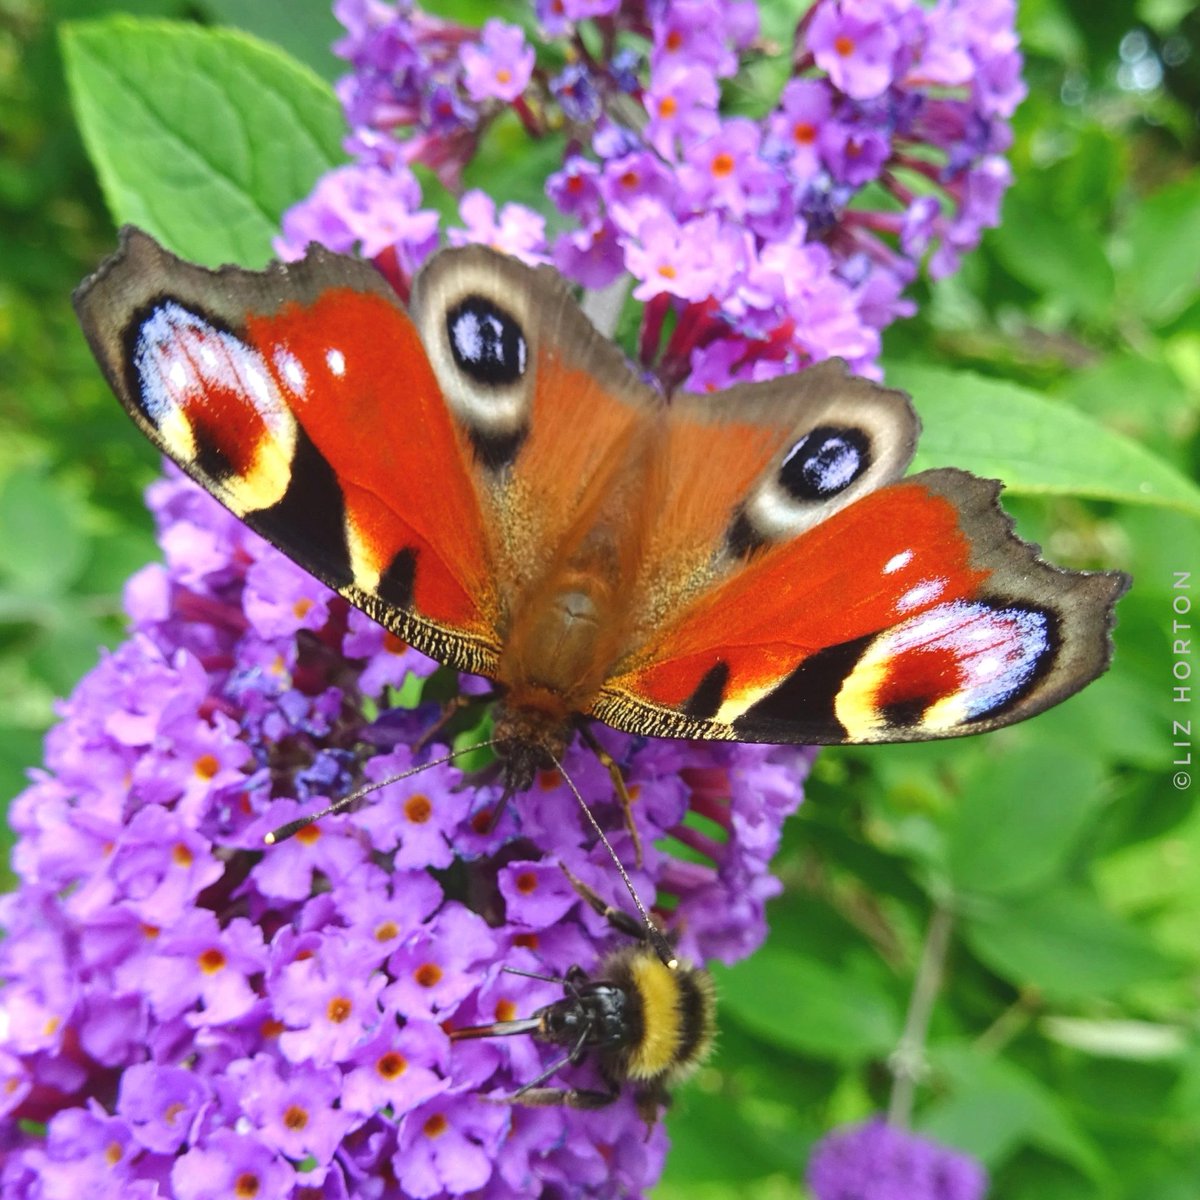 💗💜🐝 Peacock #Butterfly and a #Bumblebee..a lucky snap of two of my favourite #insects together on the Buddleia/Butterfly Bush.
#nature #wildlife #bees #photography
#butterflies #pollinators
#CountThemToSaveThem
#FridayVibes
#BeeTheChange #SaveTheBees
#BeesNeedsWeek..🍀💗🐝💜🕊